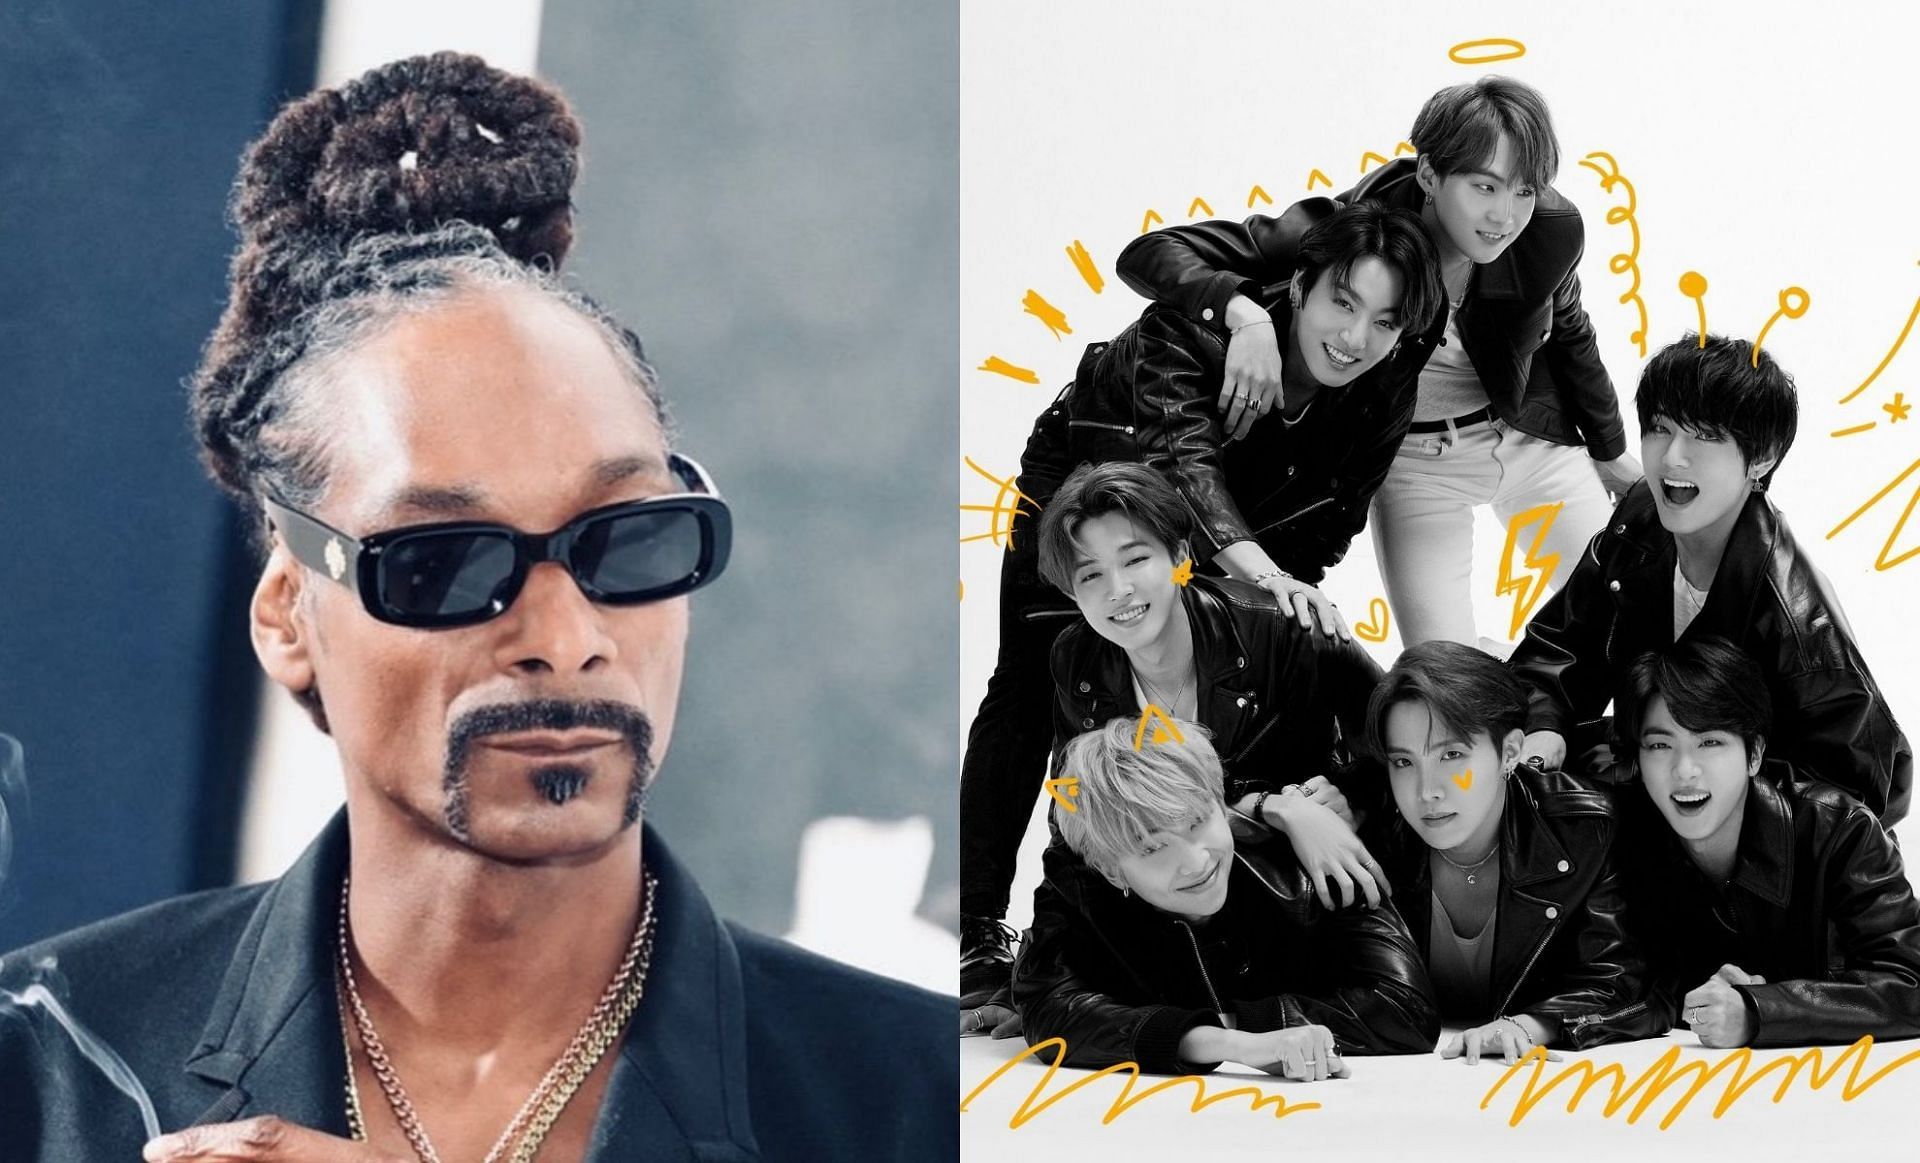 Snoop Dogg (left) says BTS (right) reached out for a collaboration (Image via @snoopdogg/Instagram and @BIGHIT_MUSIC/Twitter)